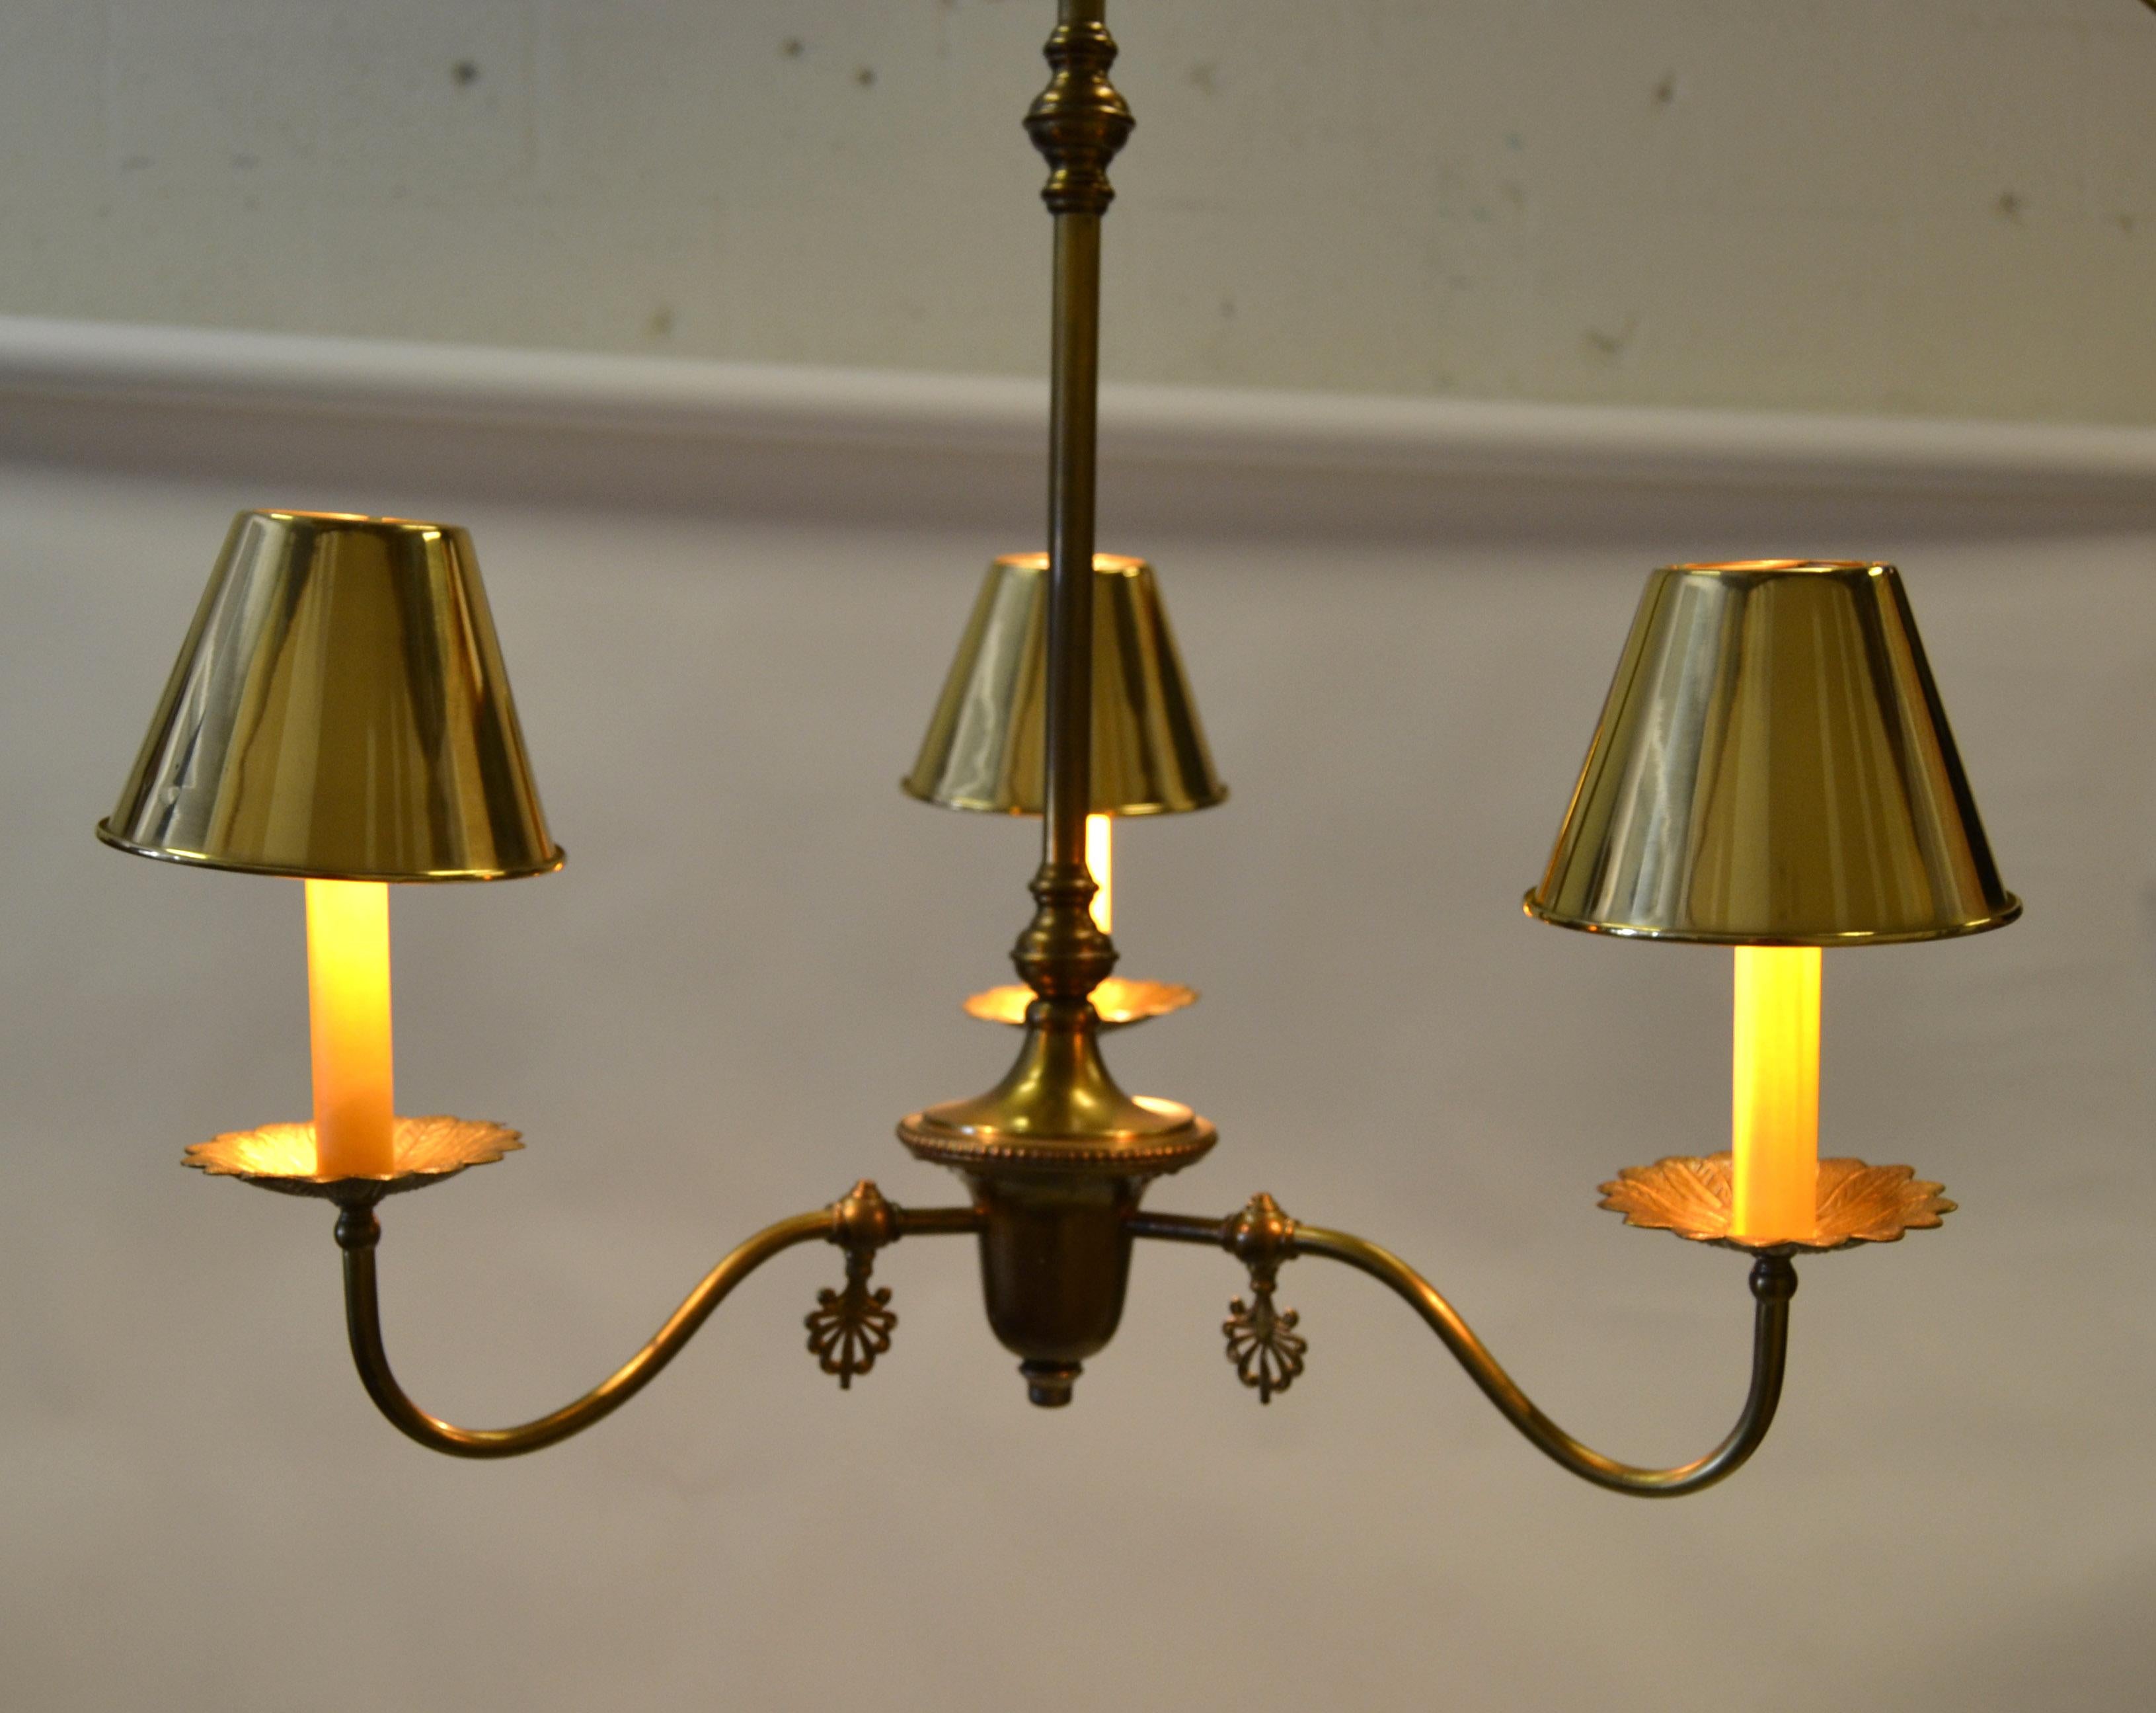 Mid-20th Century French Neoclassical 3 Arm Pendant Light Chandelier with Brass Clip-On Shades 50s For Sale